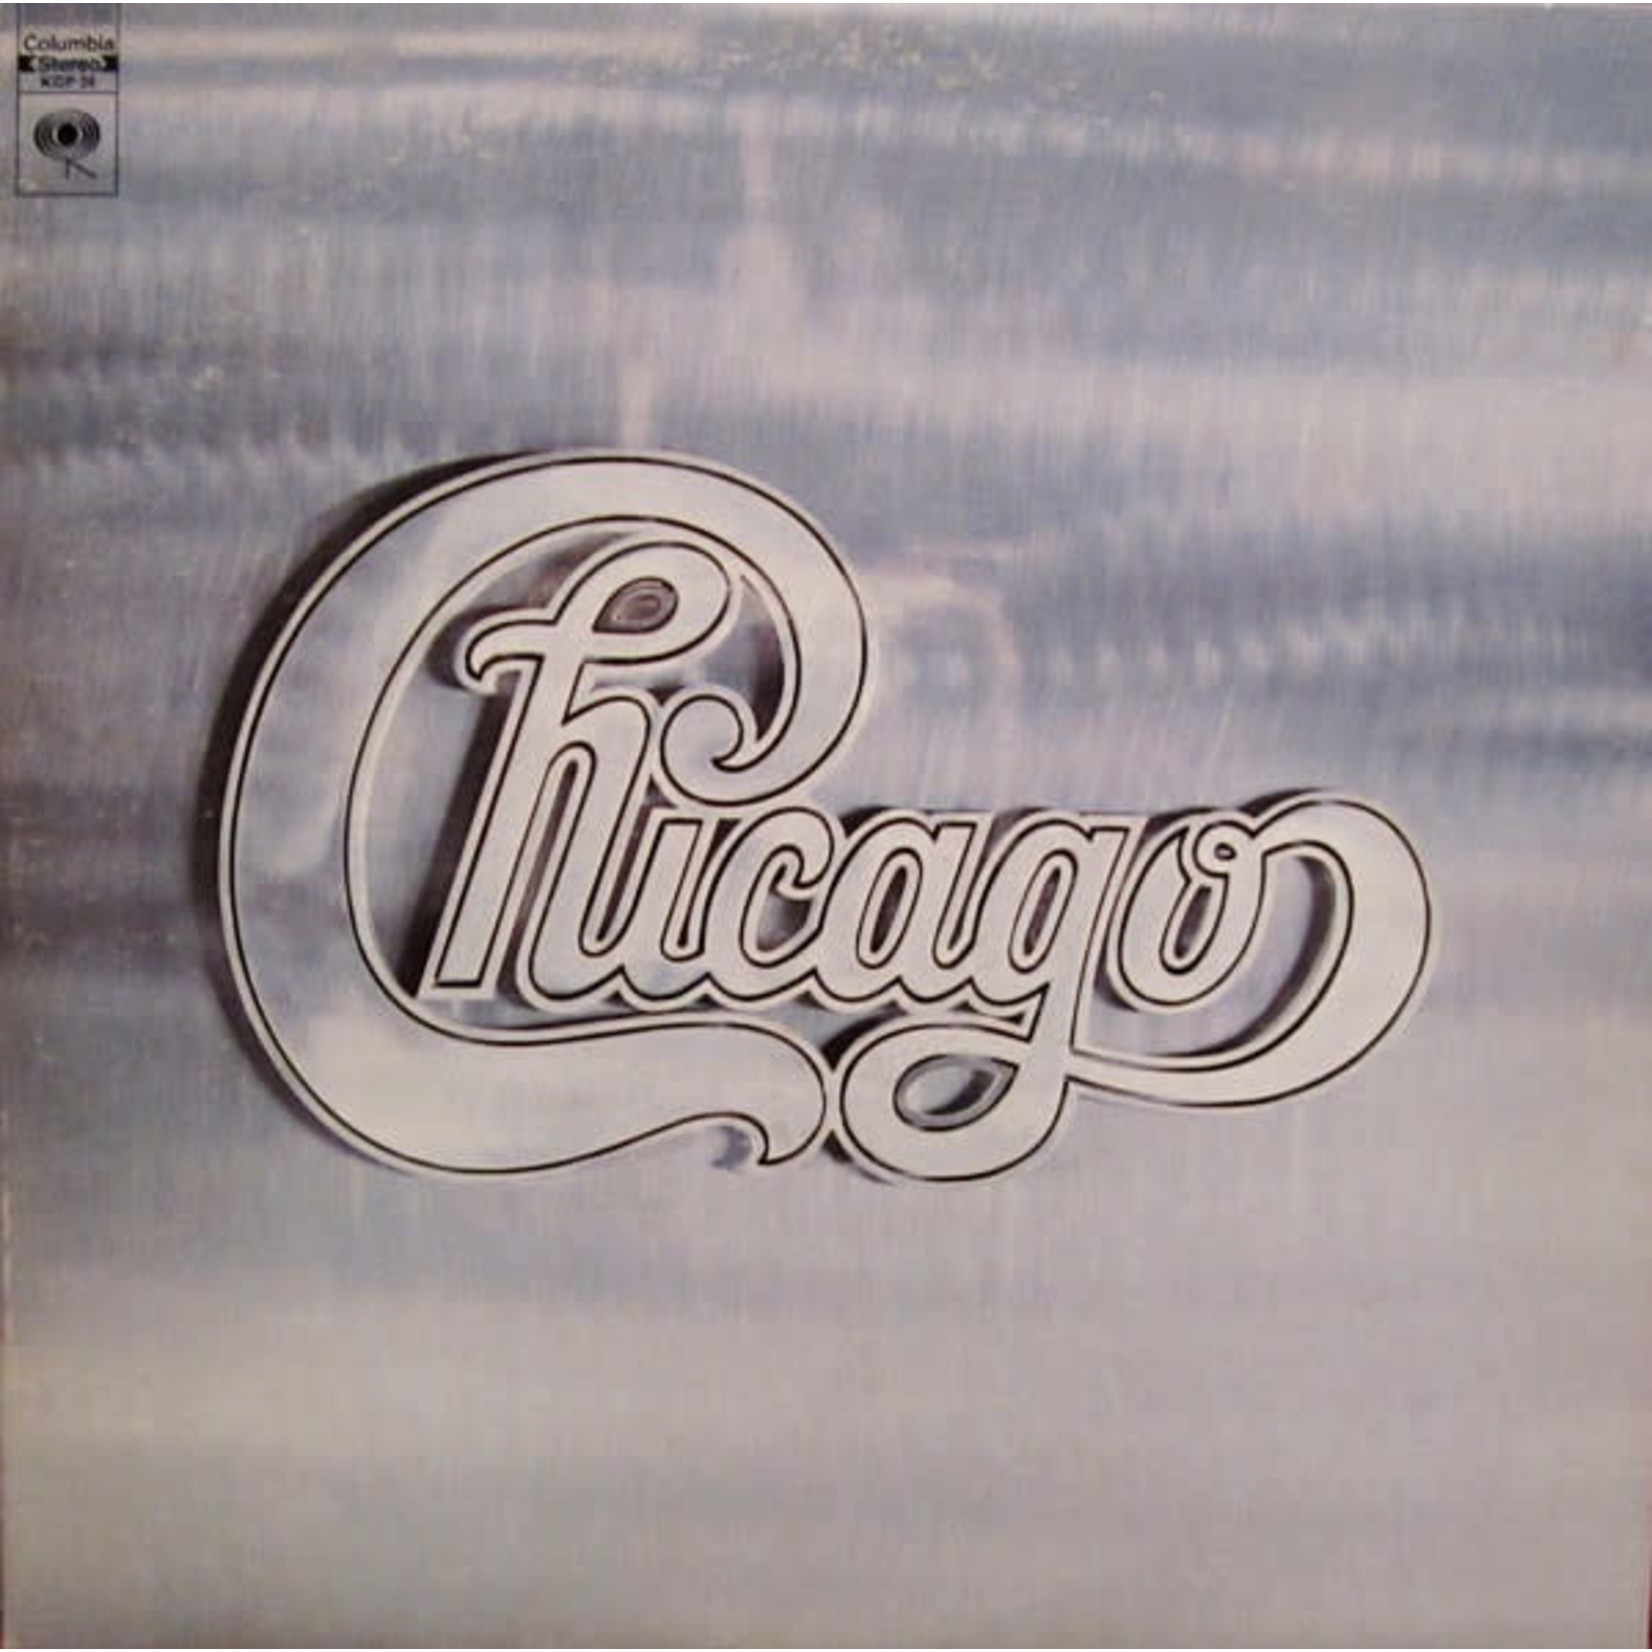 Chicago: self-titled (1970 Columbia material, 2LP, compilation, with poster) [VINTAGE]